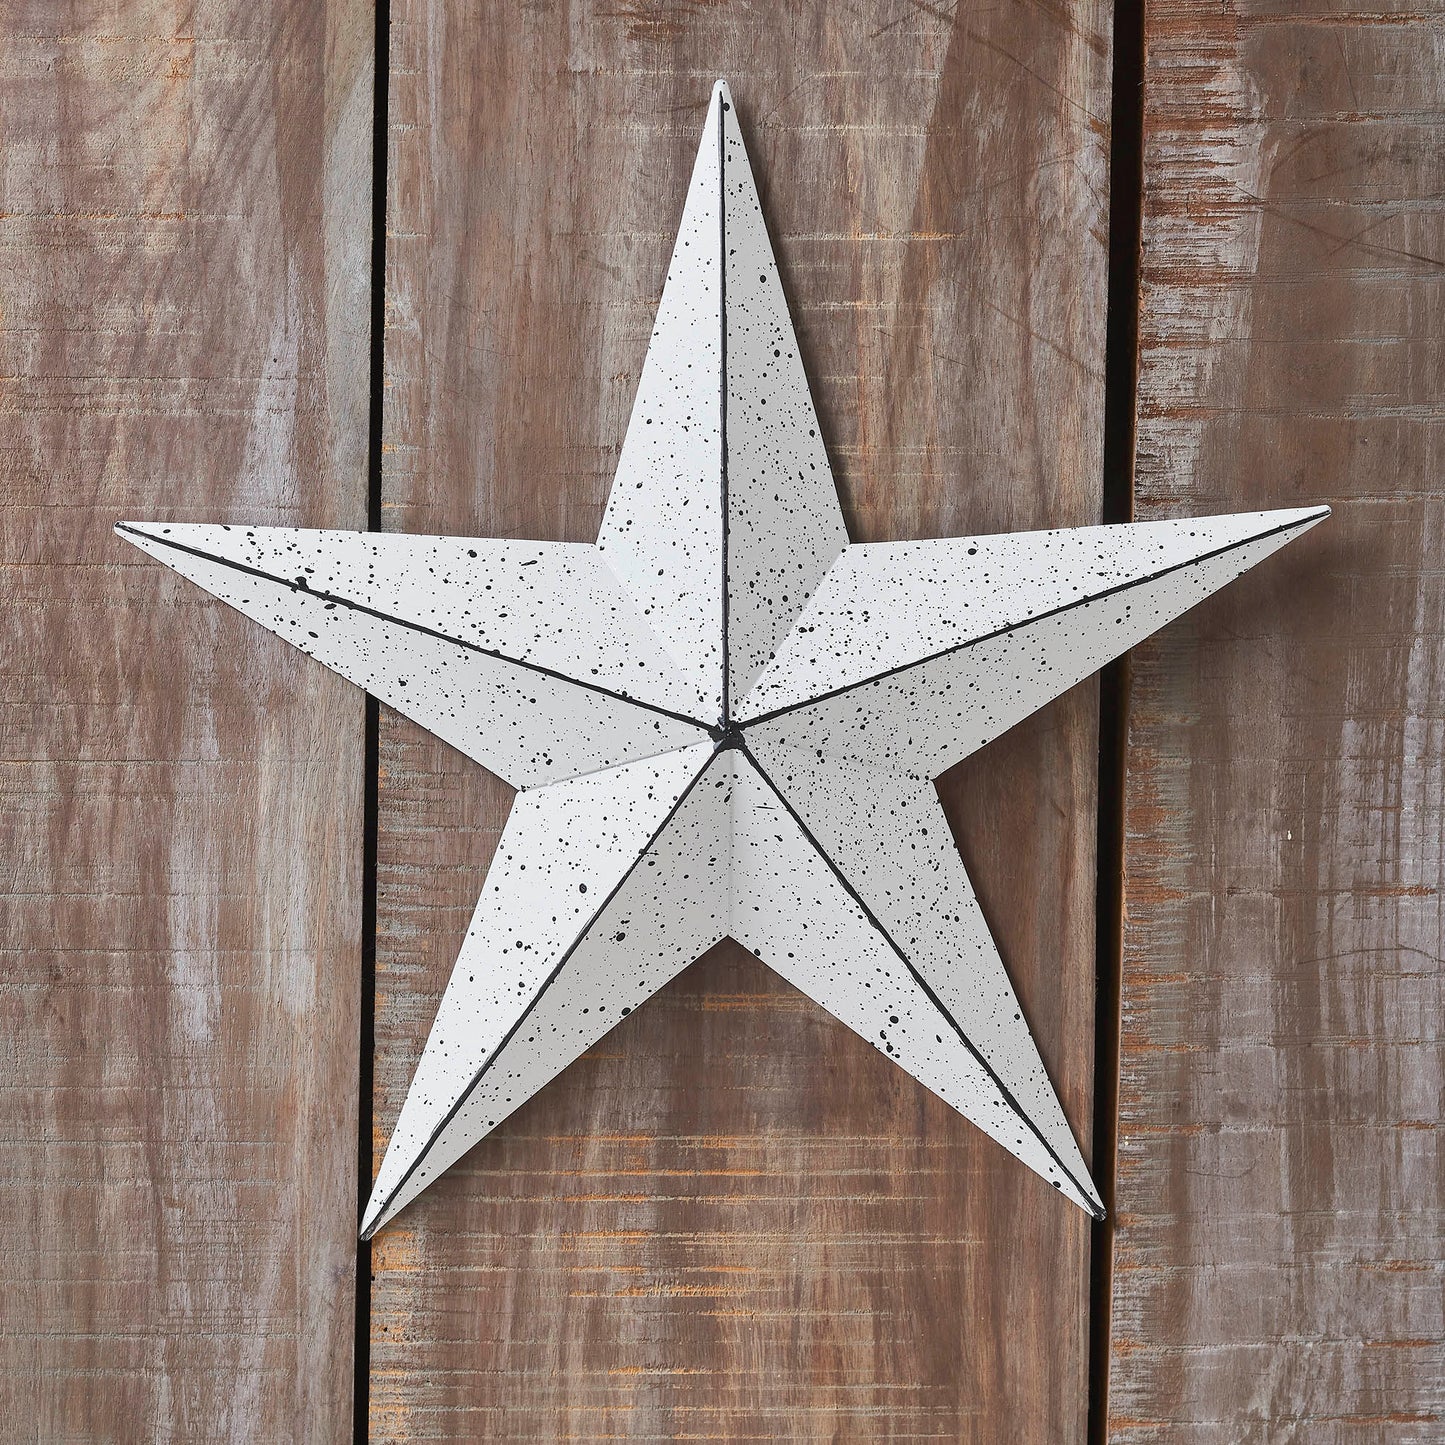 VHC Brands Patriotic Faceted Metal Star White Wall Hanging 12x12, Independence Day Decor, American Star Design, Distressed Appearance Metal Wall Hanging,  Star Shape, Country, Matte White